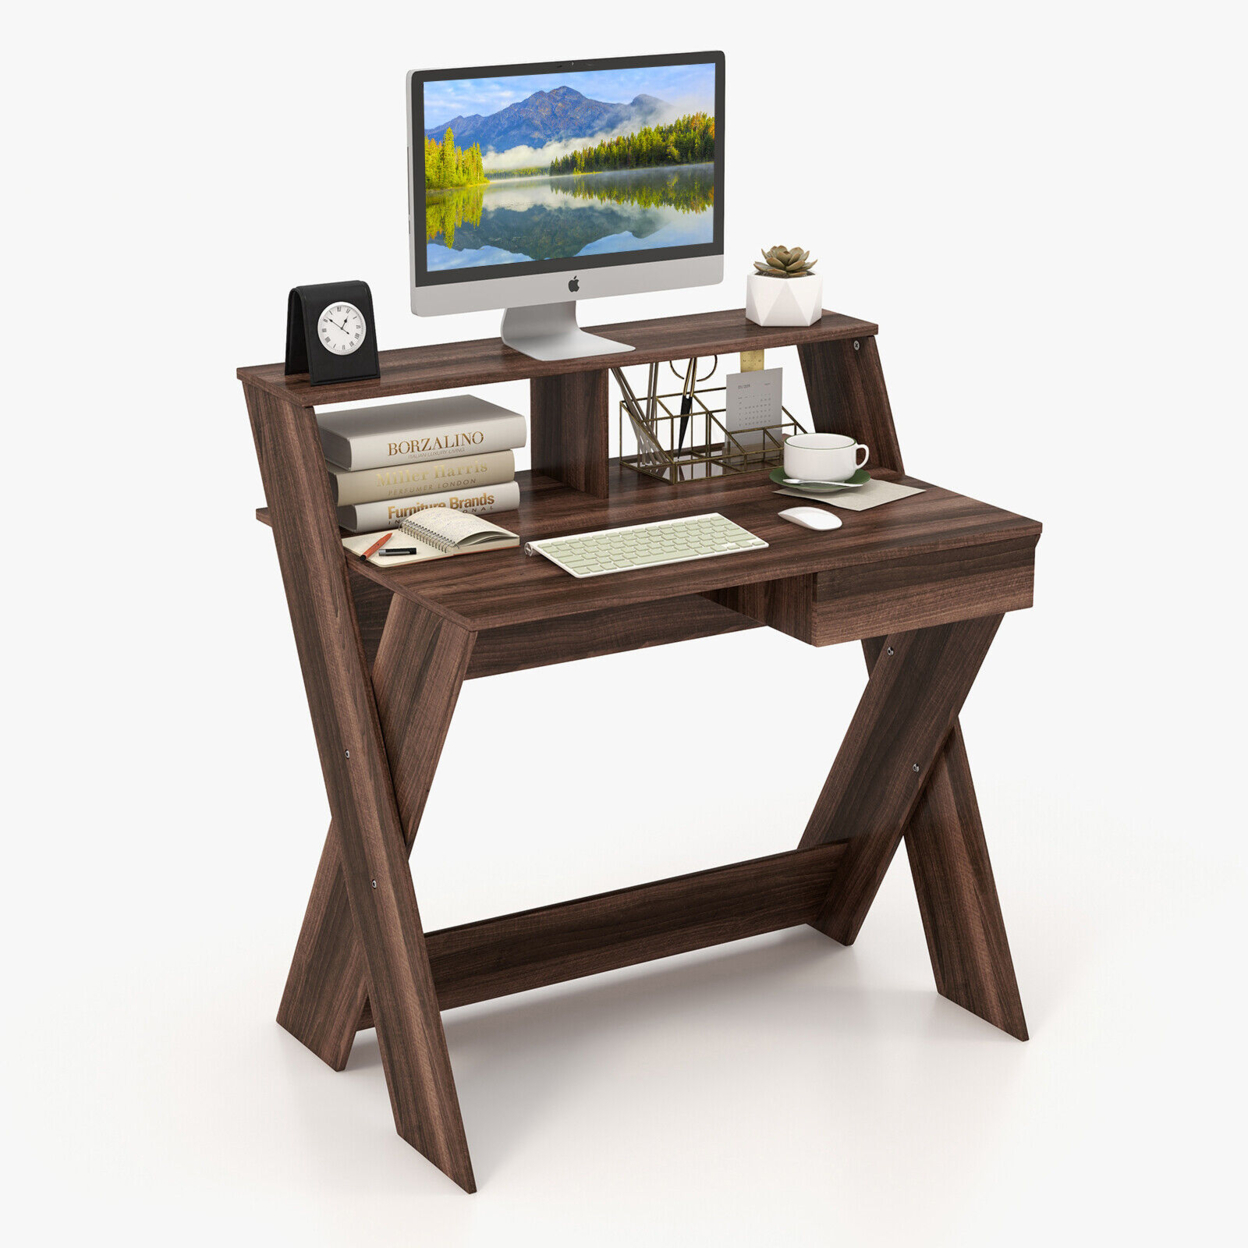 Computer Desk Study Writing Table Small Space W/ Drawer & Monitor Stand - Walnut